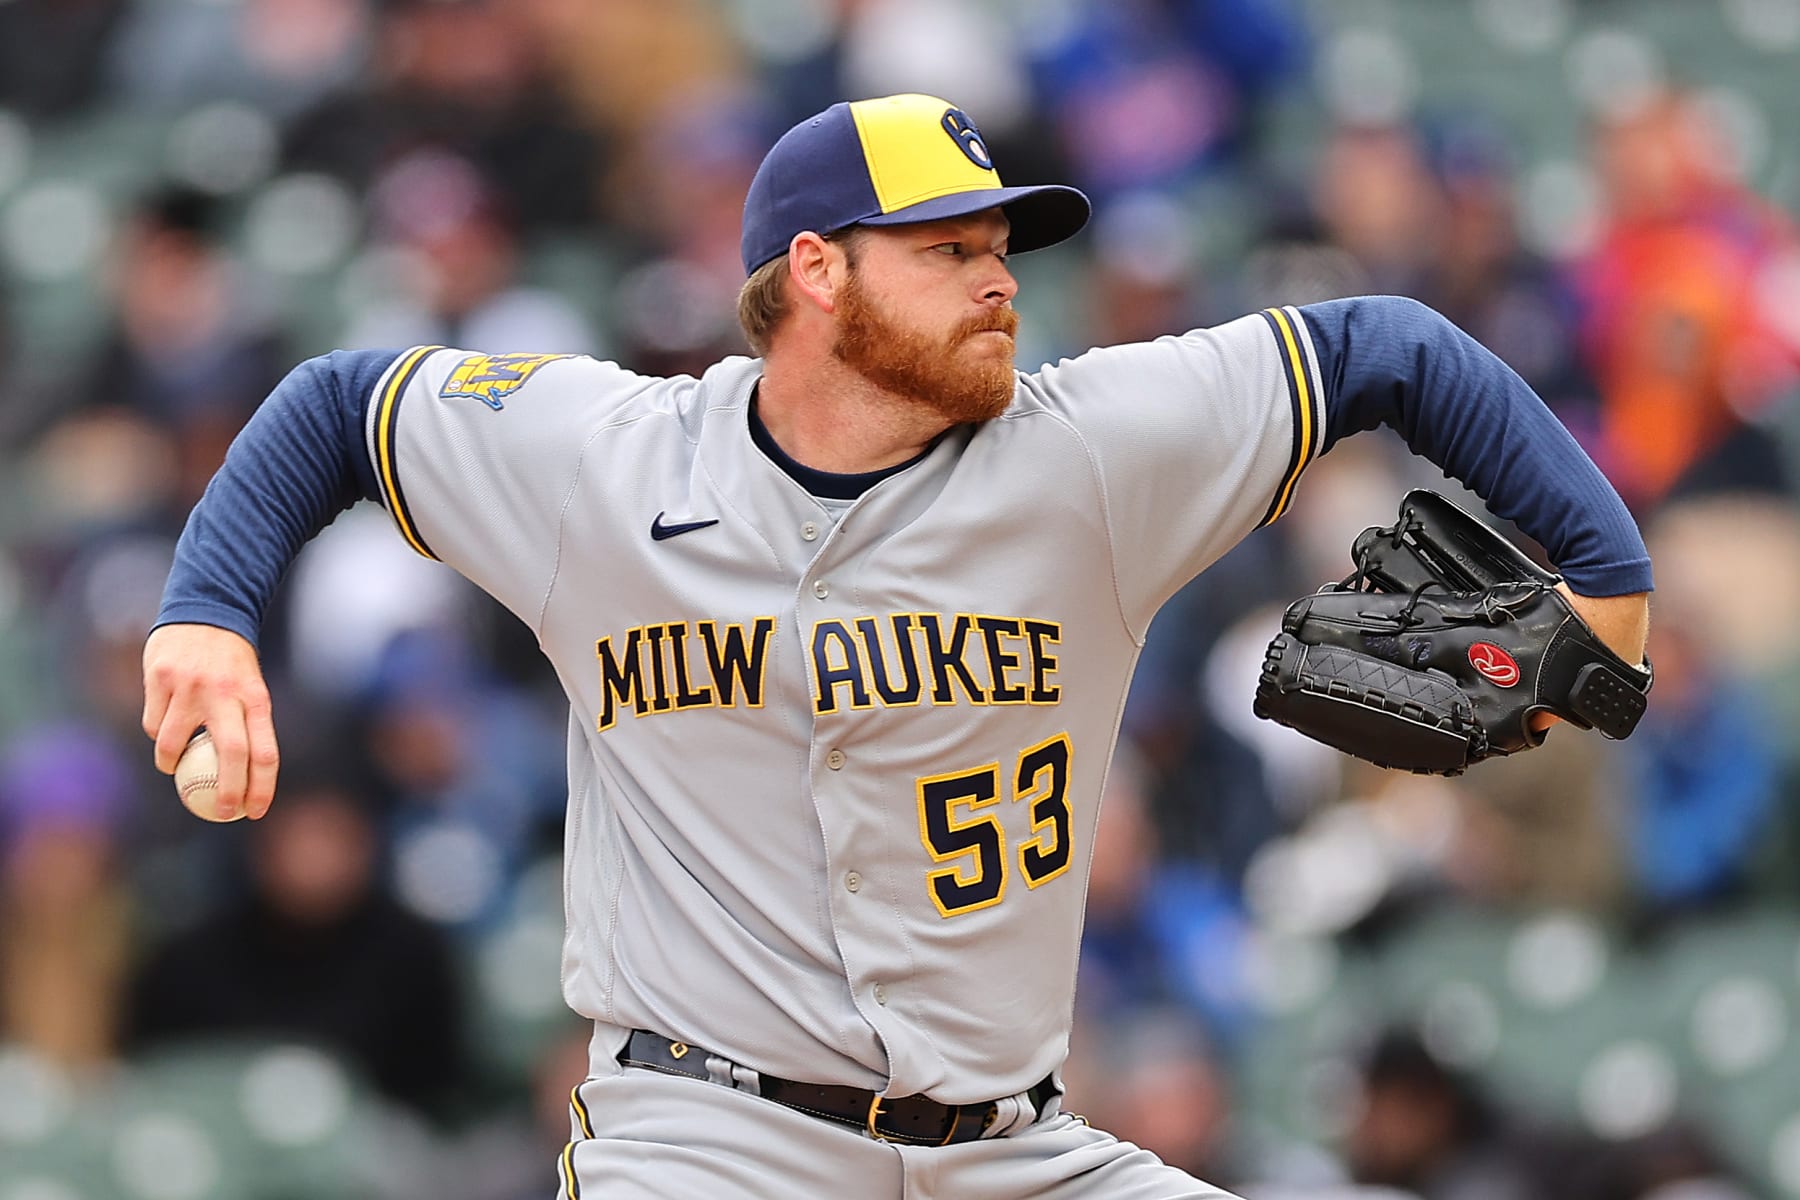 MLB: Thames ends home run drought as Brewers beat Pirates 6-2